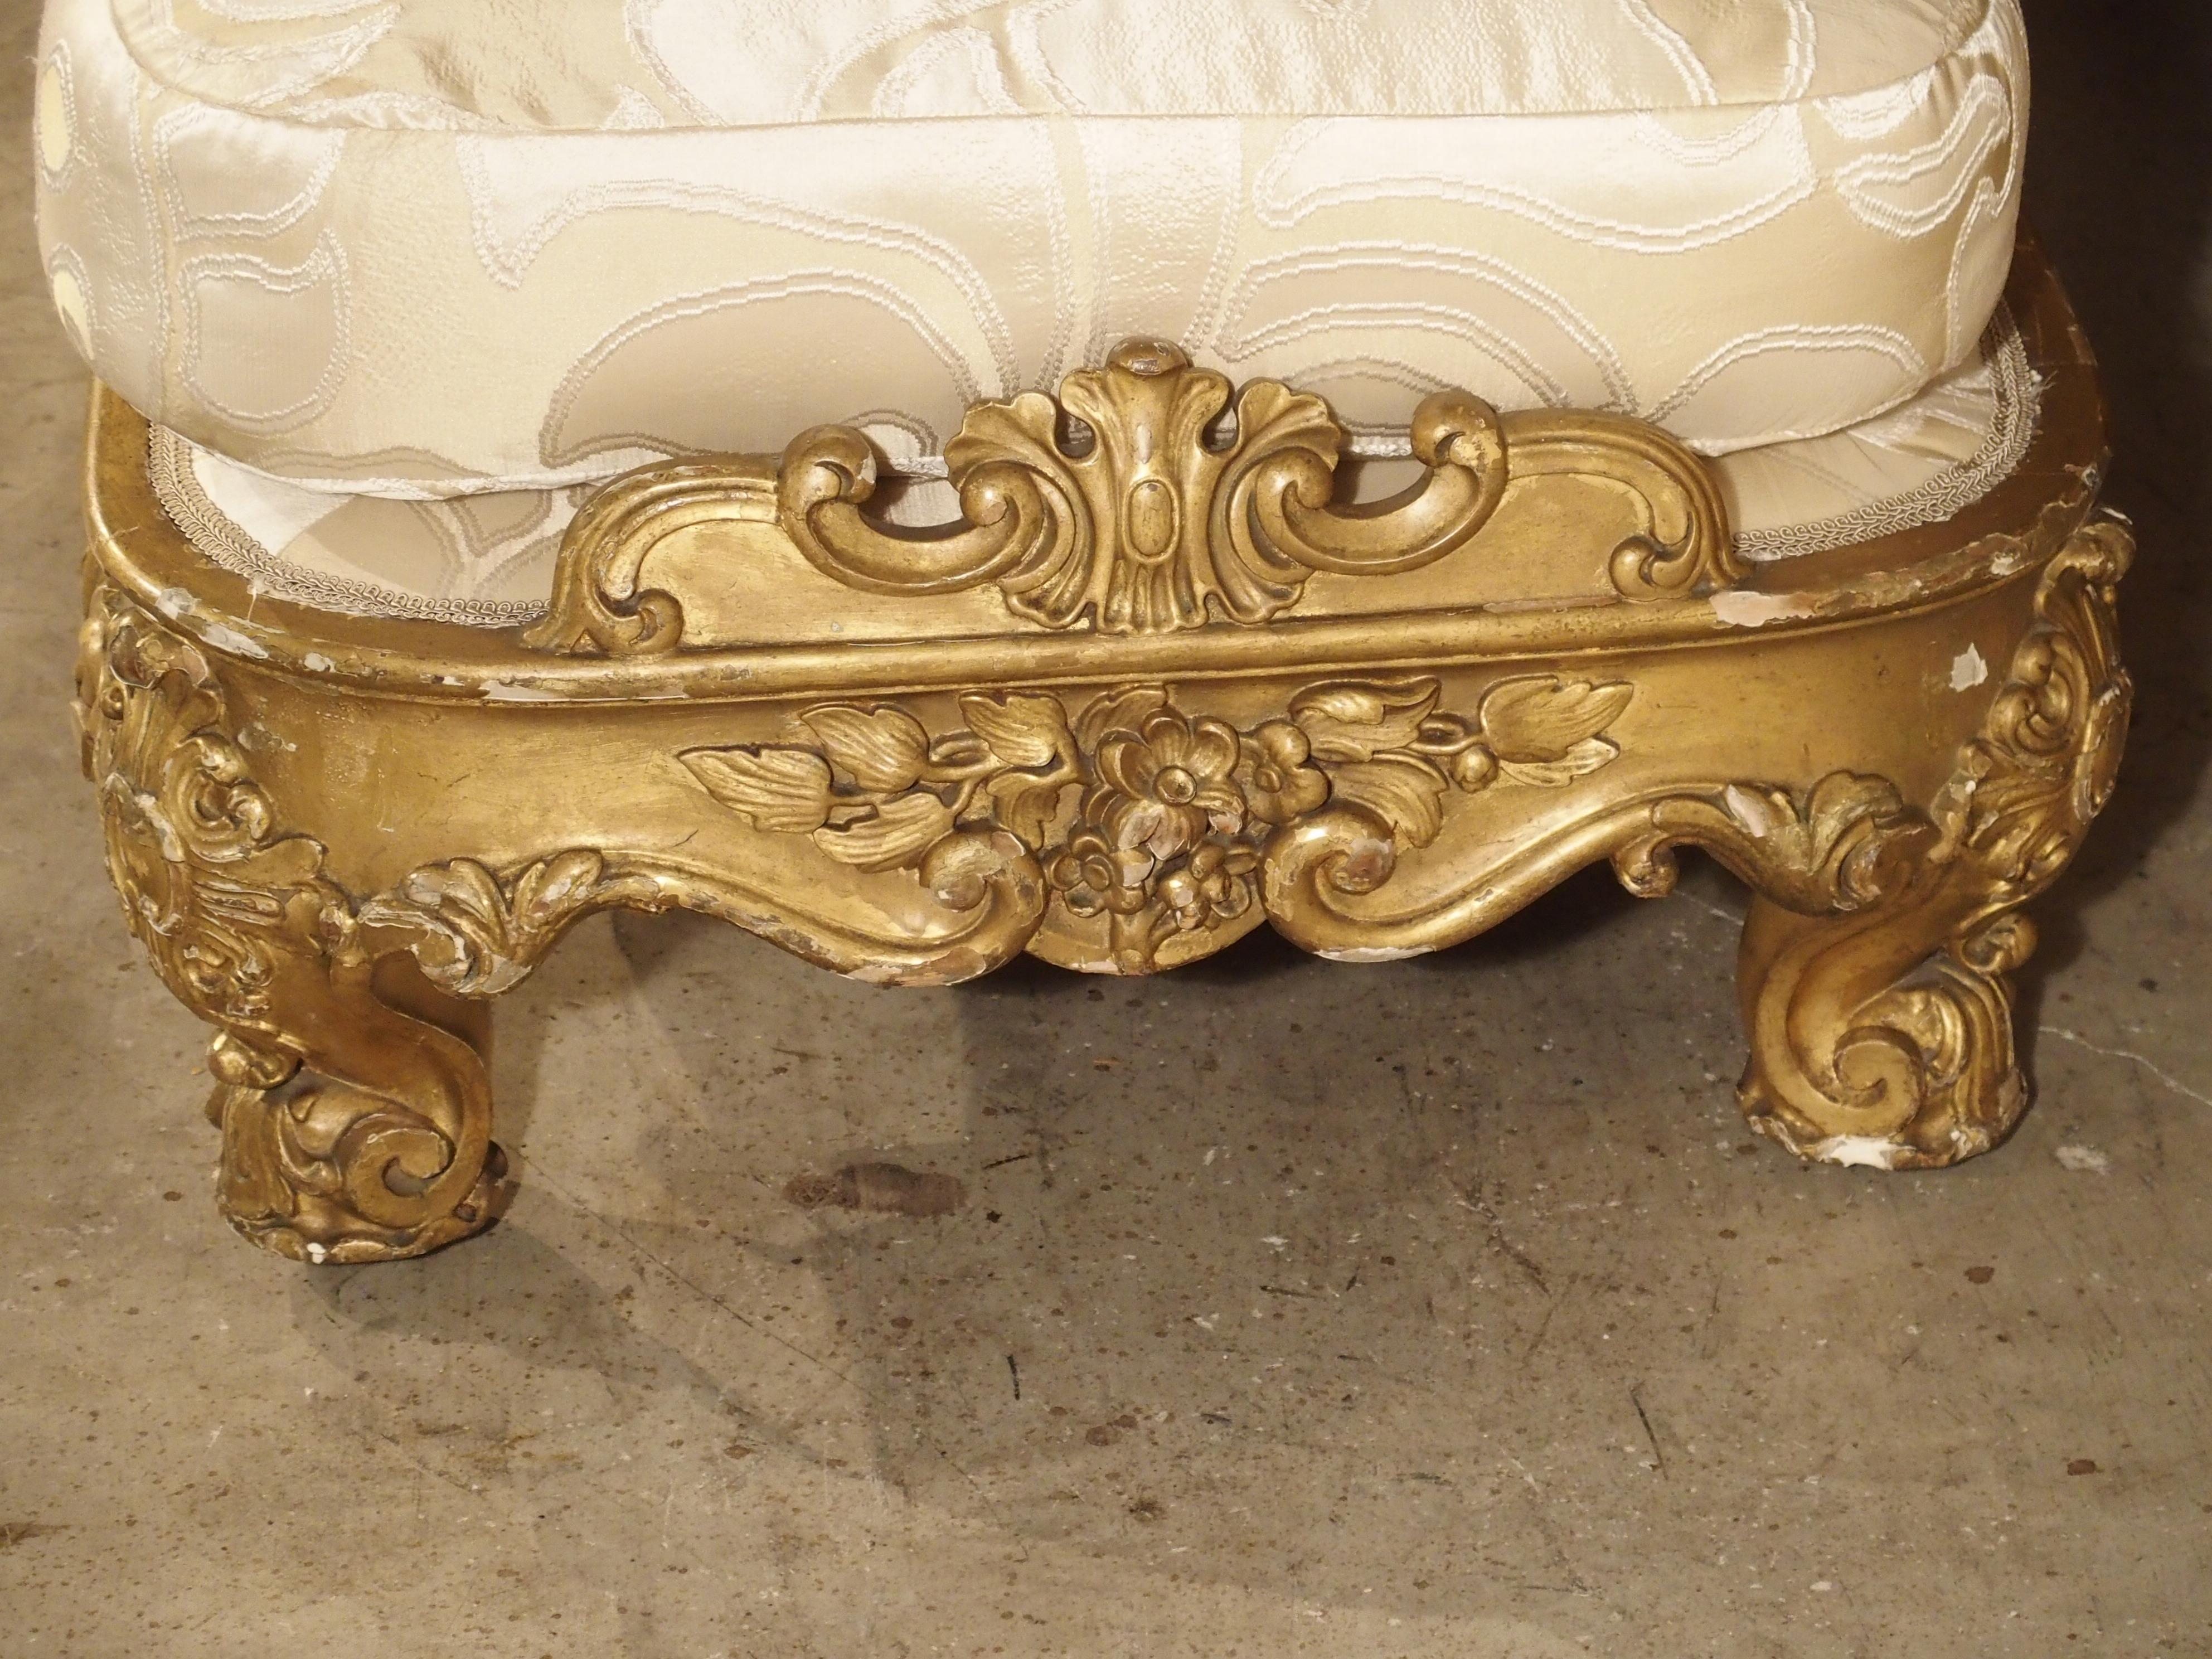 19th Century French Giltwood Chaise Lounge Upholstered in Bergamo Silk 6